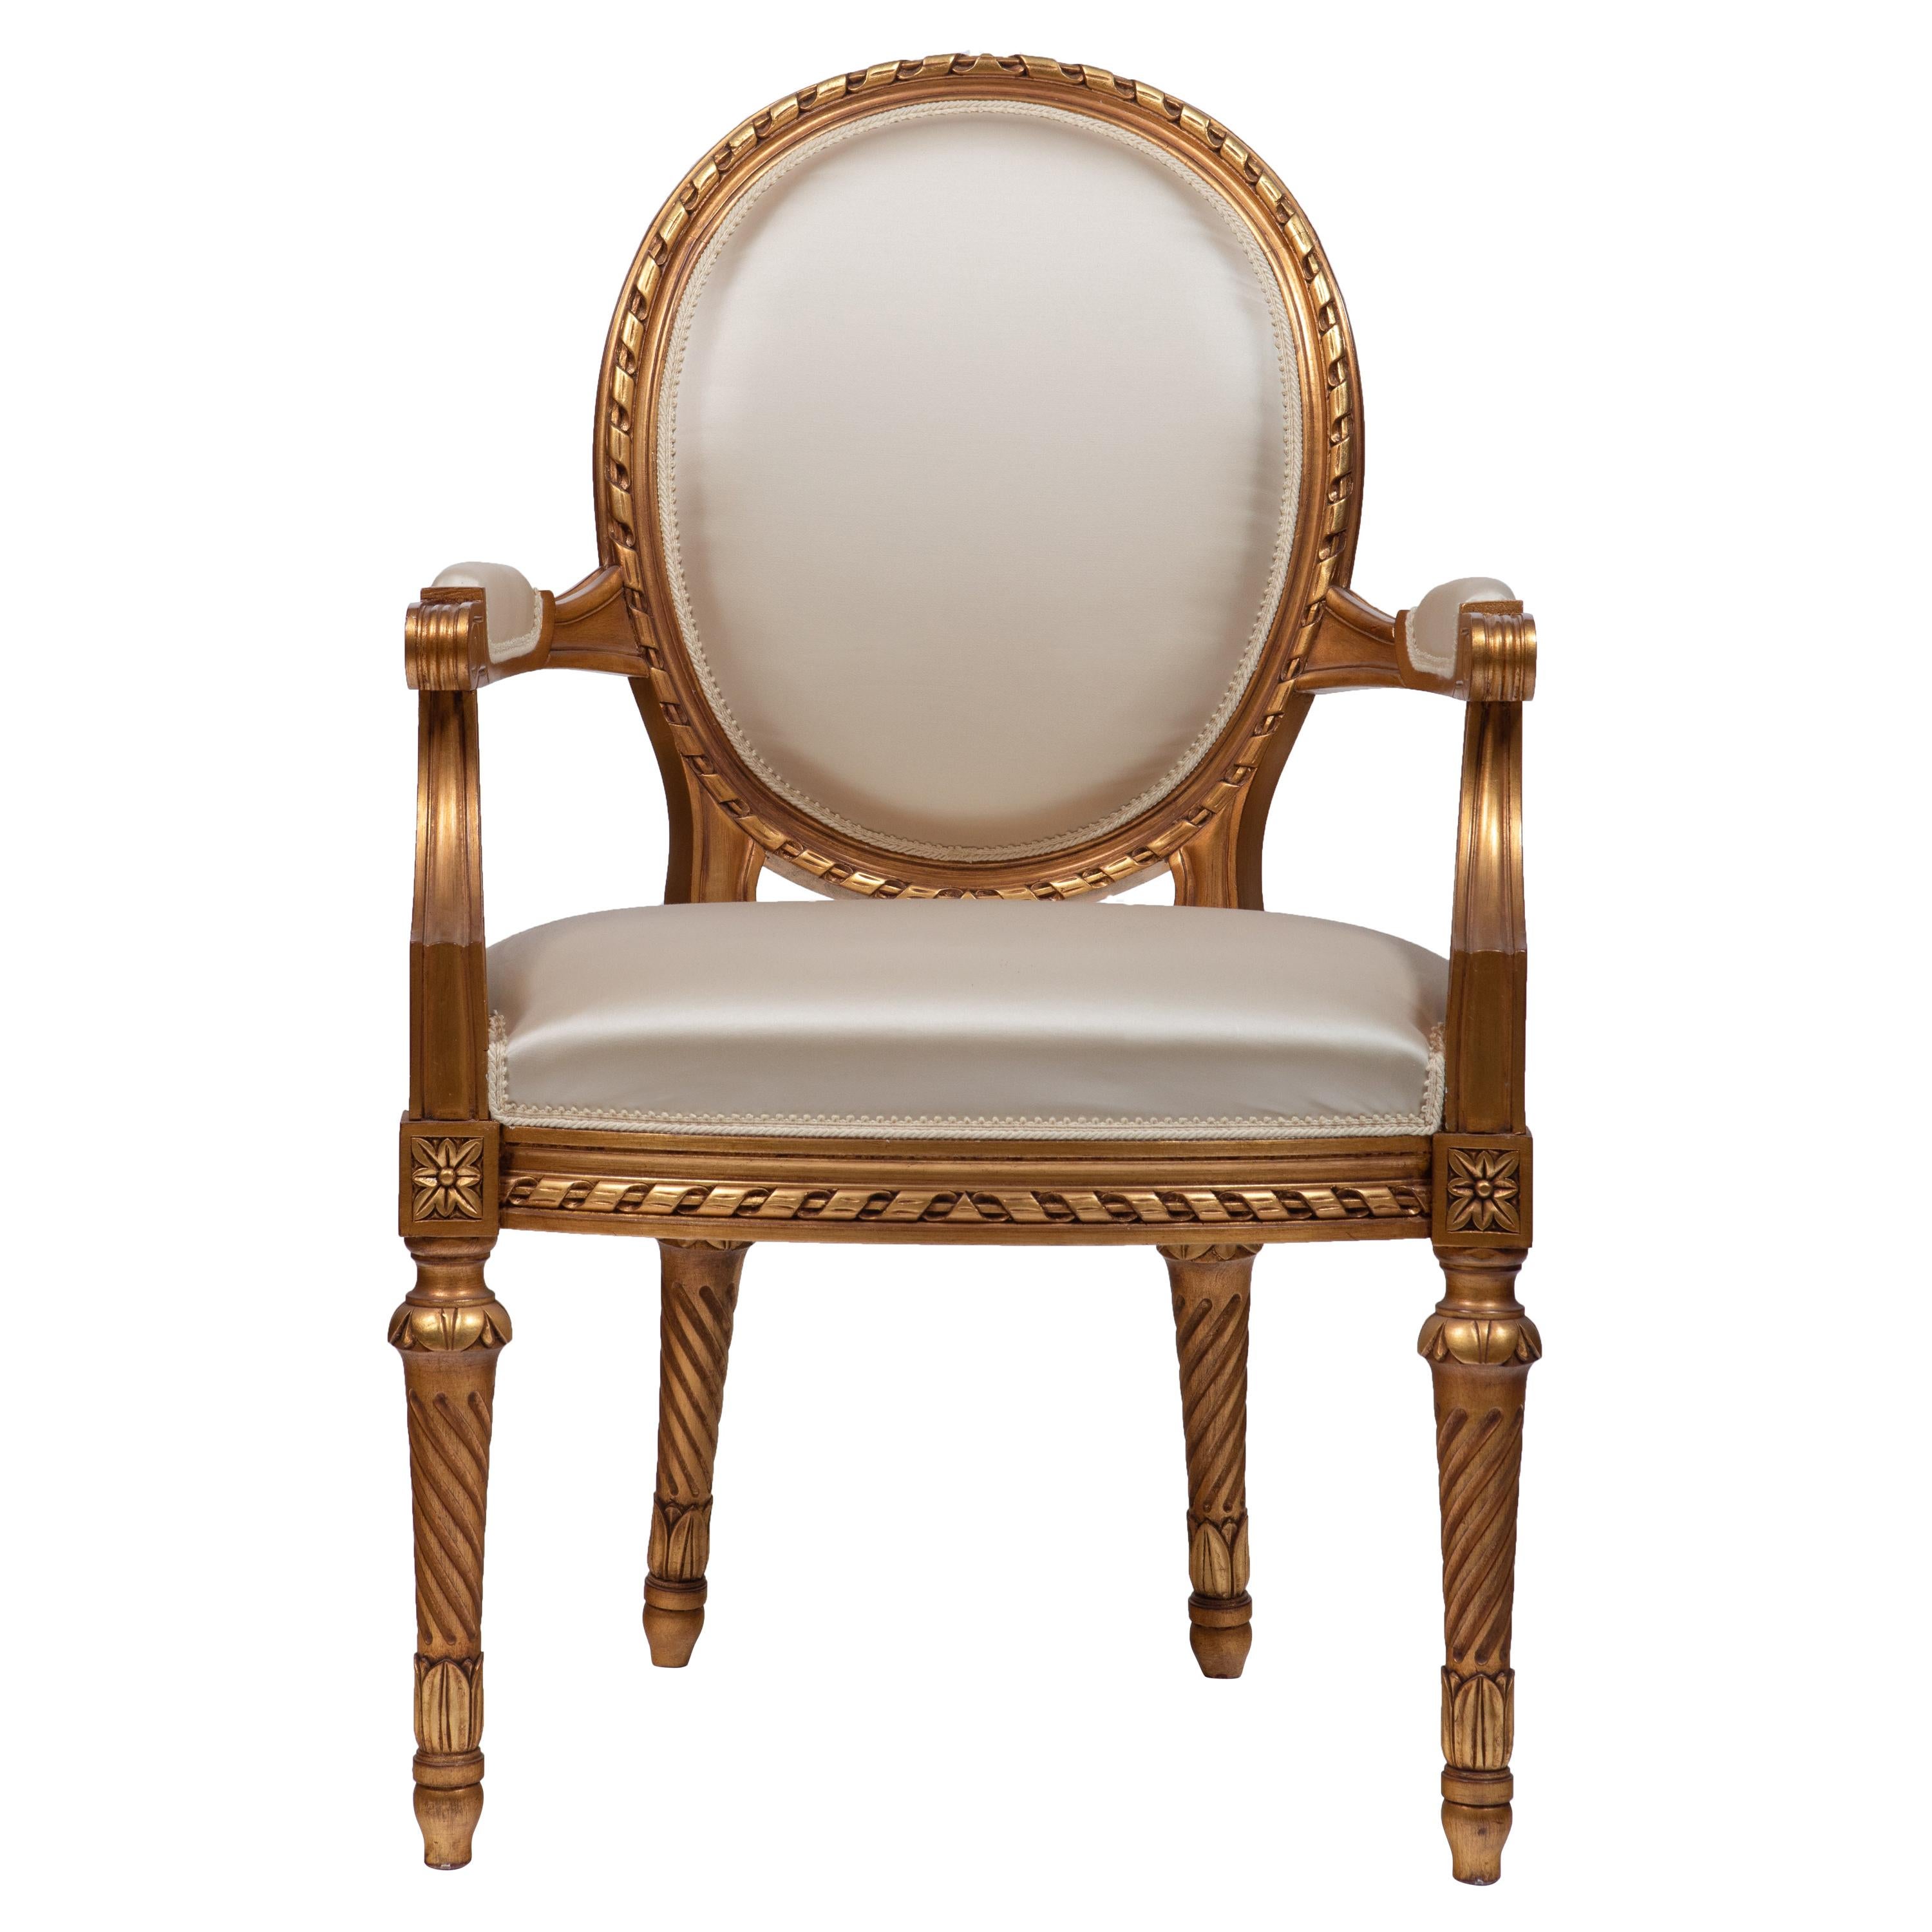 Luis XVI Style Armchair, Hand Carved and Gold Leaf Finishing, Made in Italy